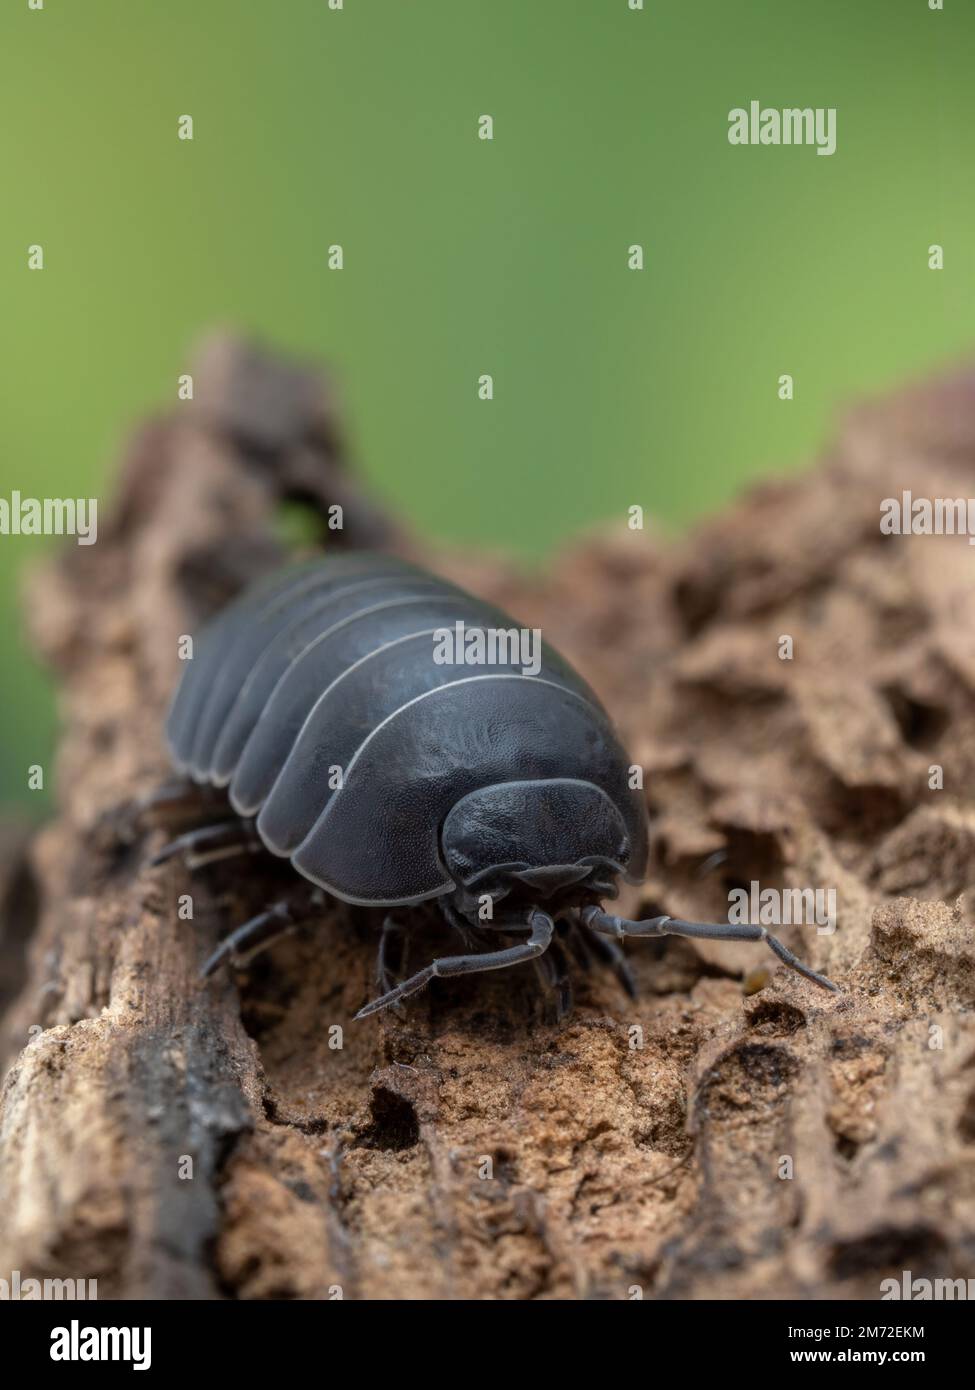 Vertical image of a darkly colored common pill-bug (Armadillidium vulgare) on rotted wood, facing the camera. This is the most scientifically studied Stock Photo